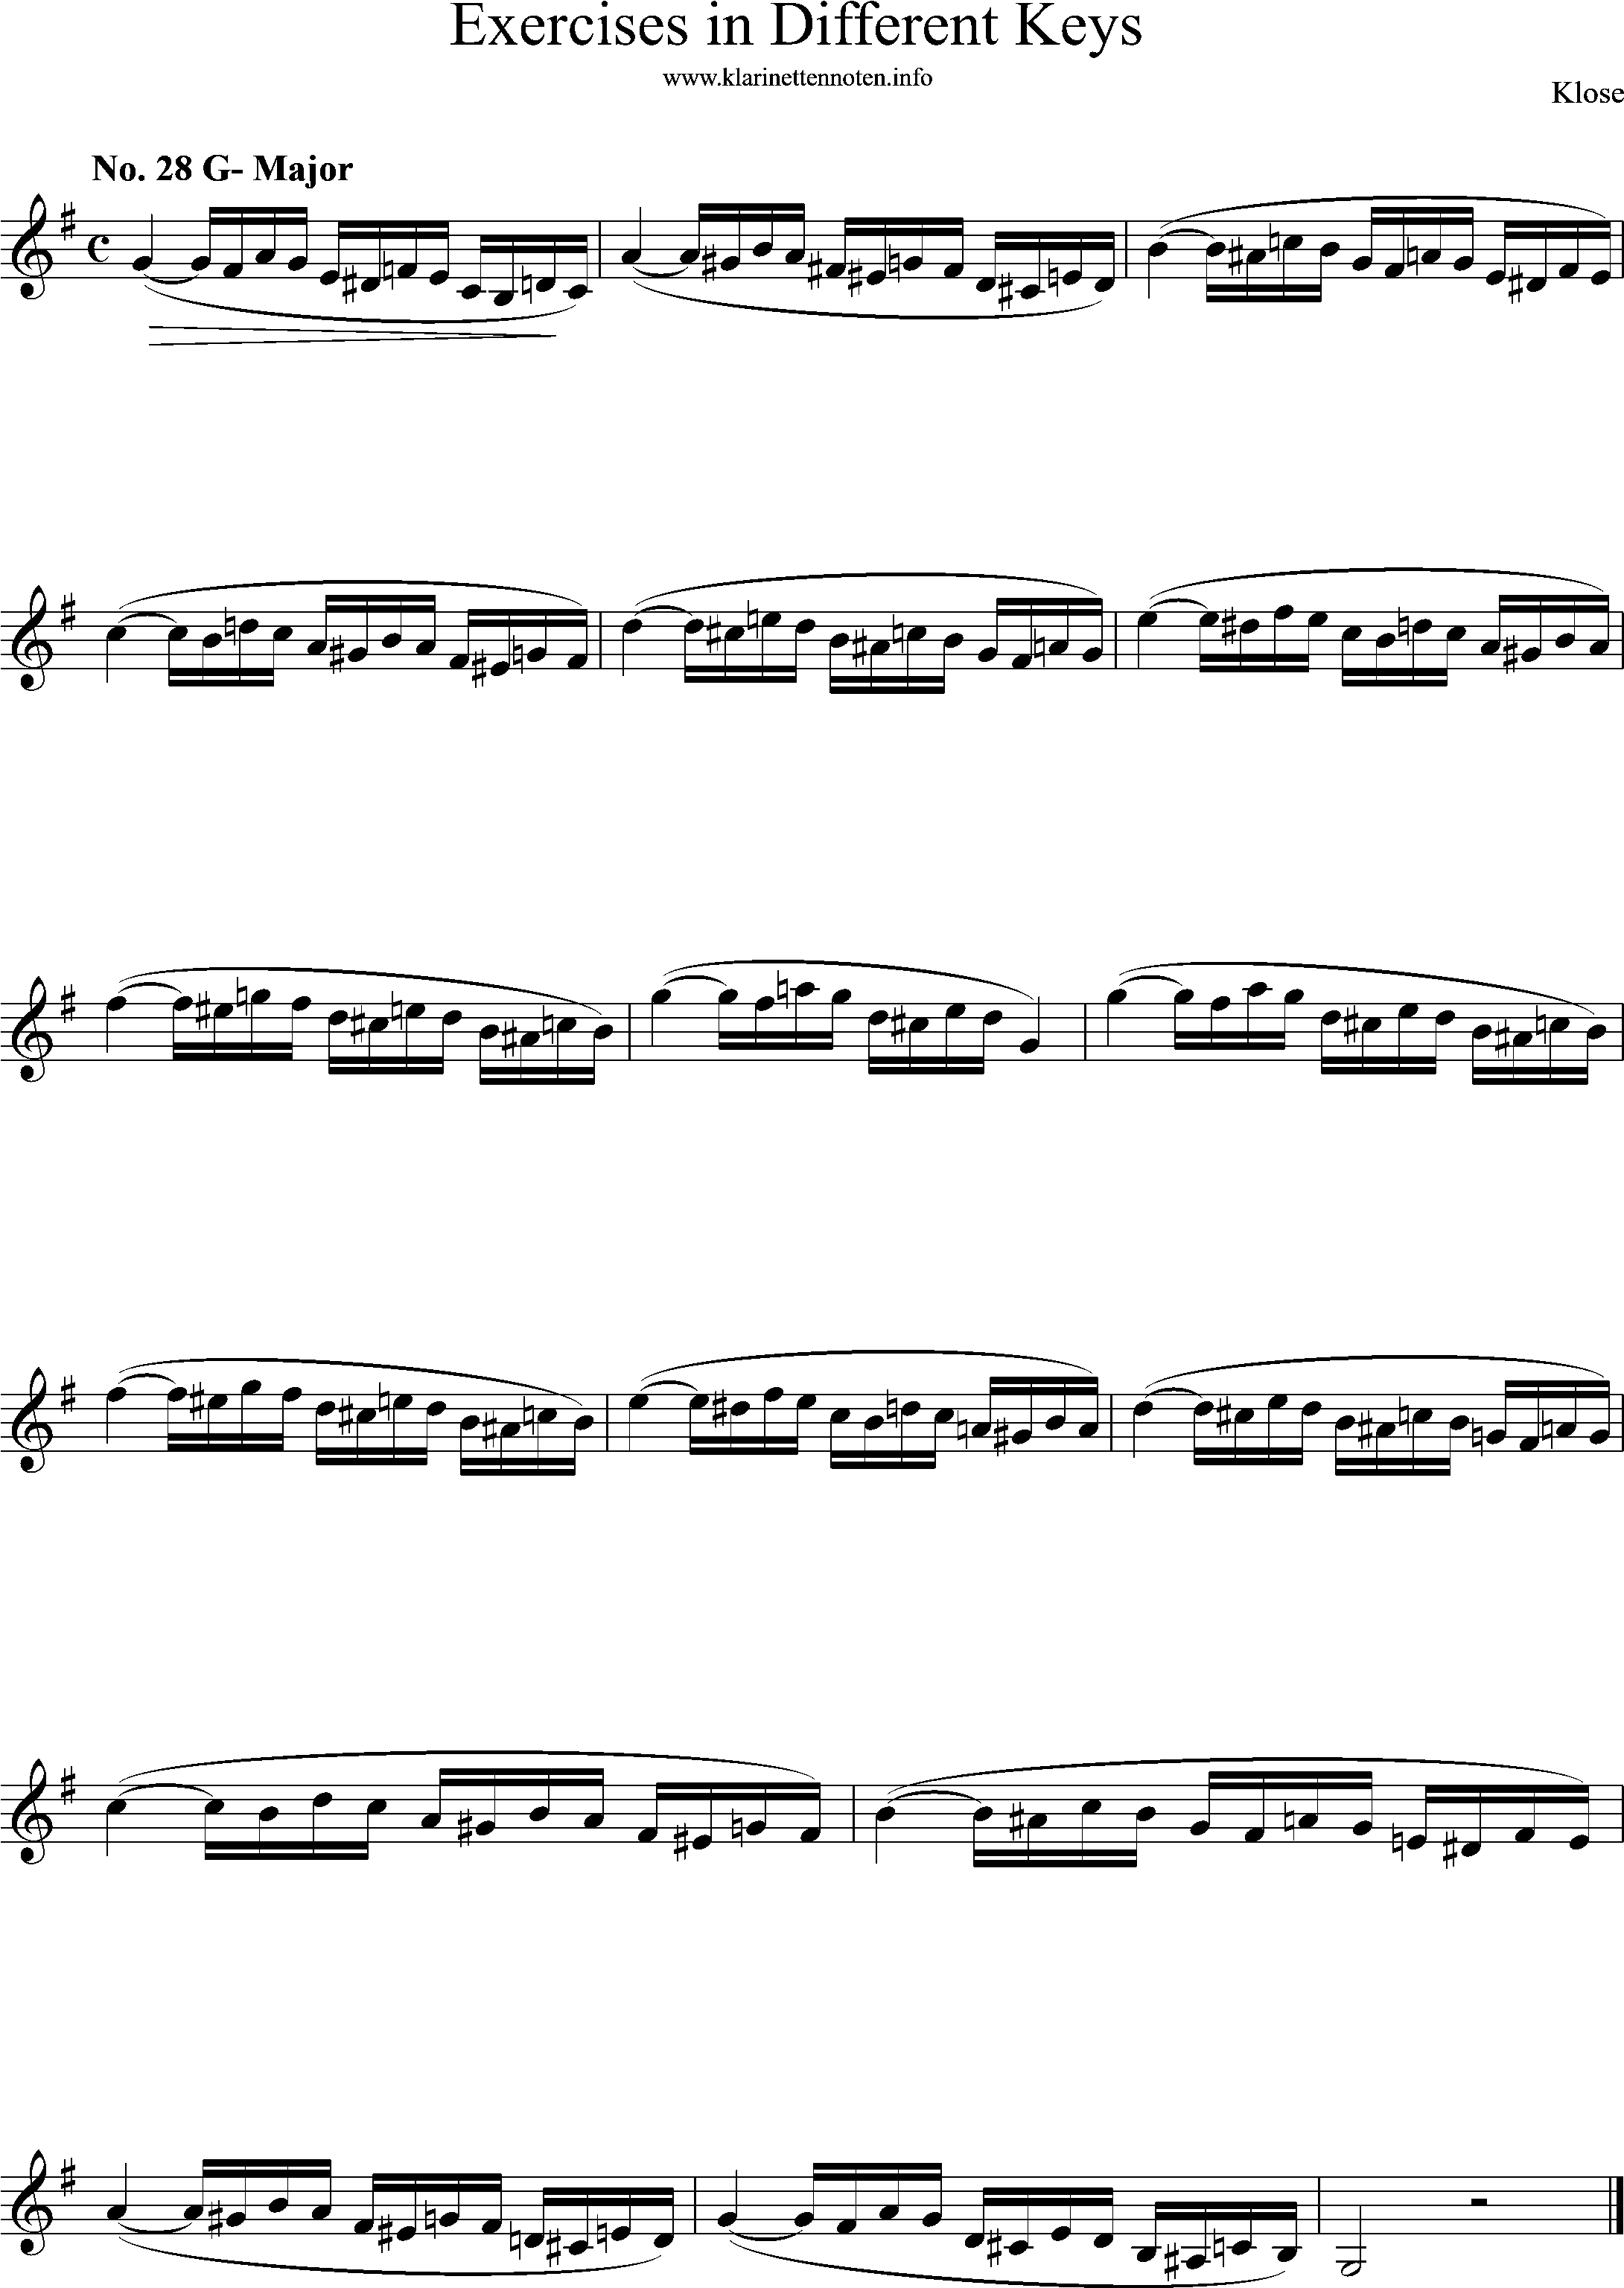 Exercises in Differewnt Keys, klose, No-28, g-major